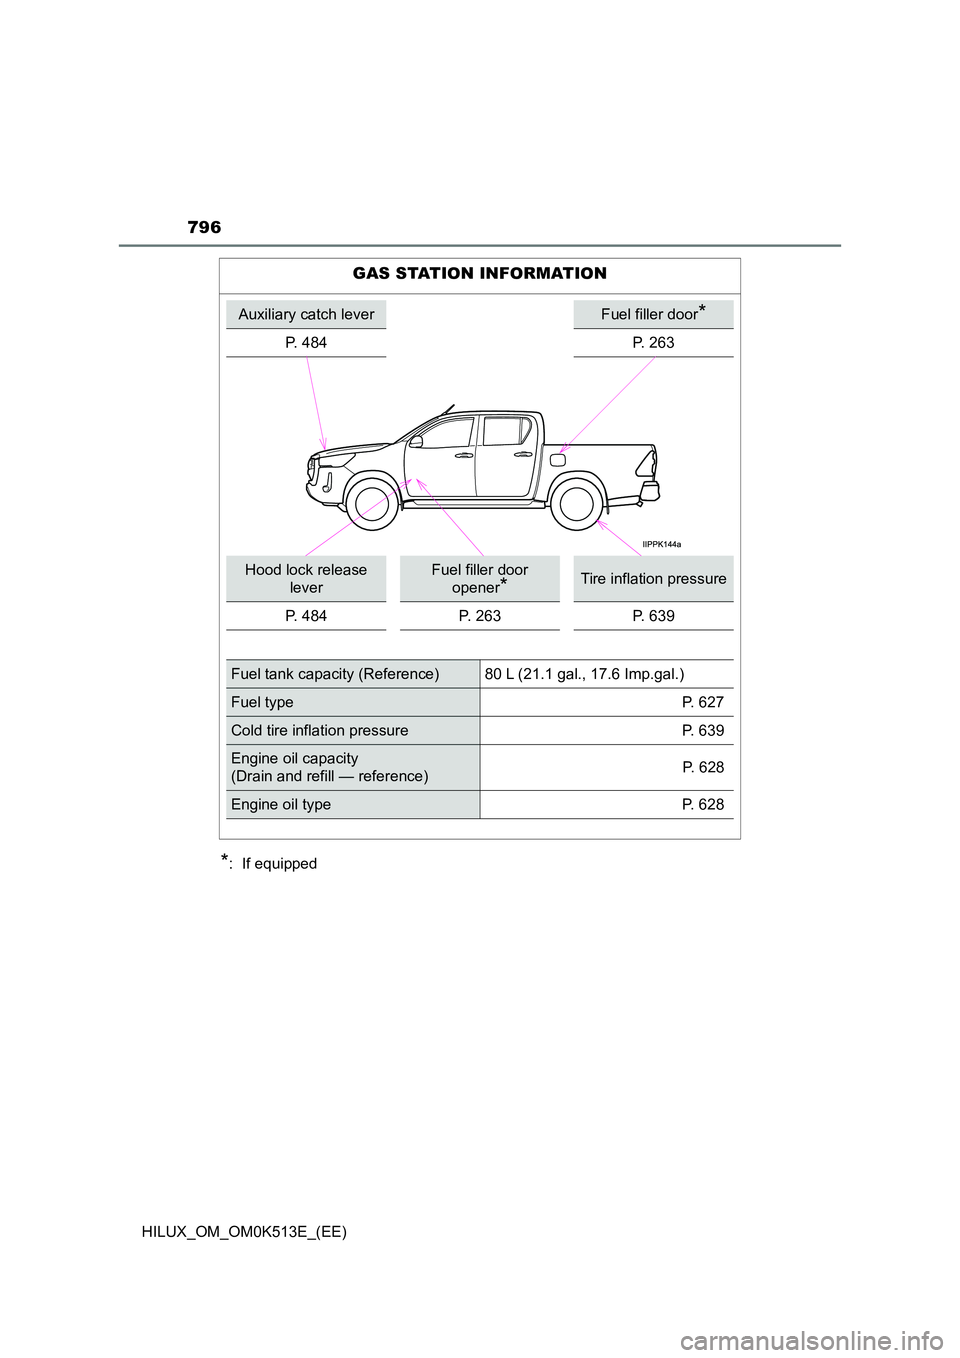 TOYOTA HILUX 2021  Owners Manual (in English) 796
HILUX_OM_OM0K513E_(EE)
*:  If equipped
GAS STATION INFORMATION
Auxiliary catch leverFuel filler door*
P. 484P. 263
Hood lock release  
lever
Fuel filler door 
opener*Tire inflation pressure 
P. 48